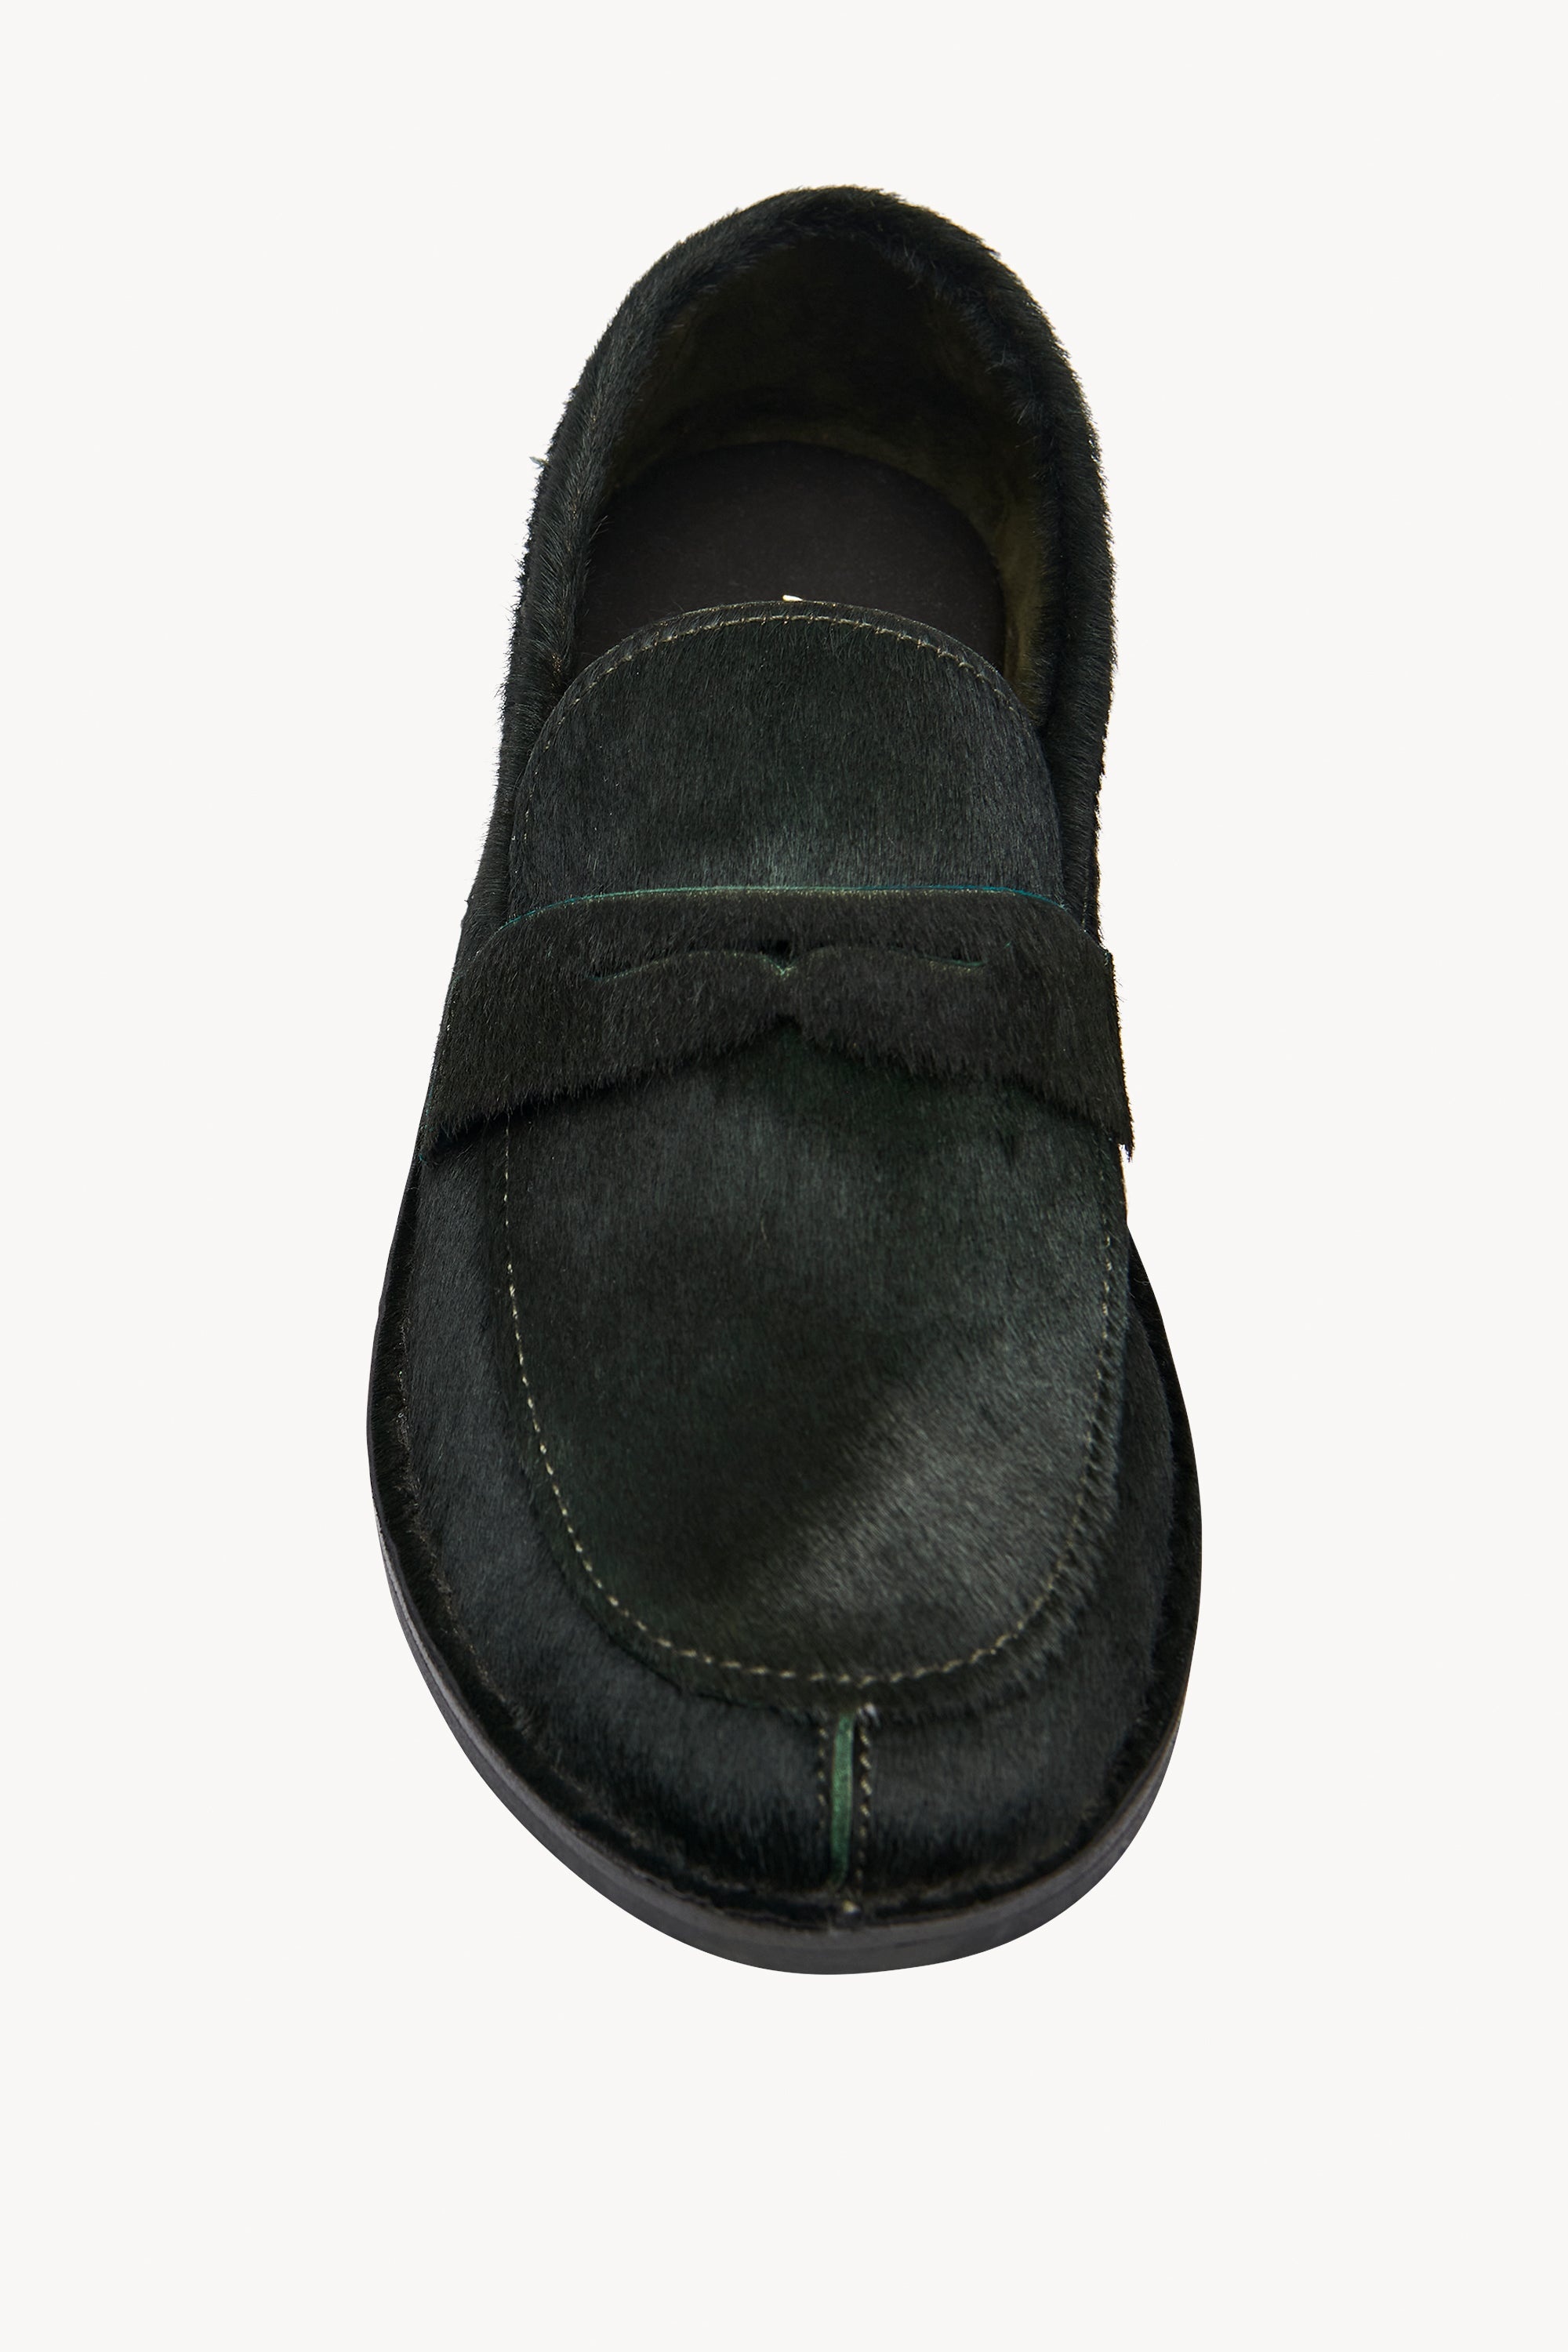 Cary Loafer in Pony - 3